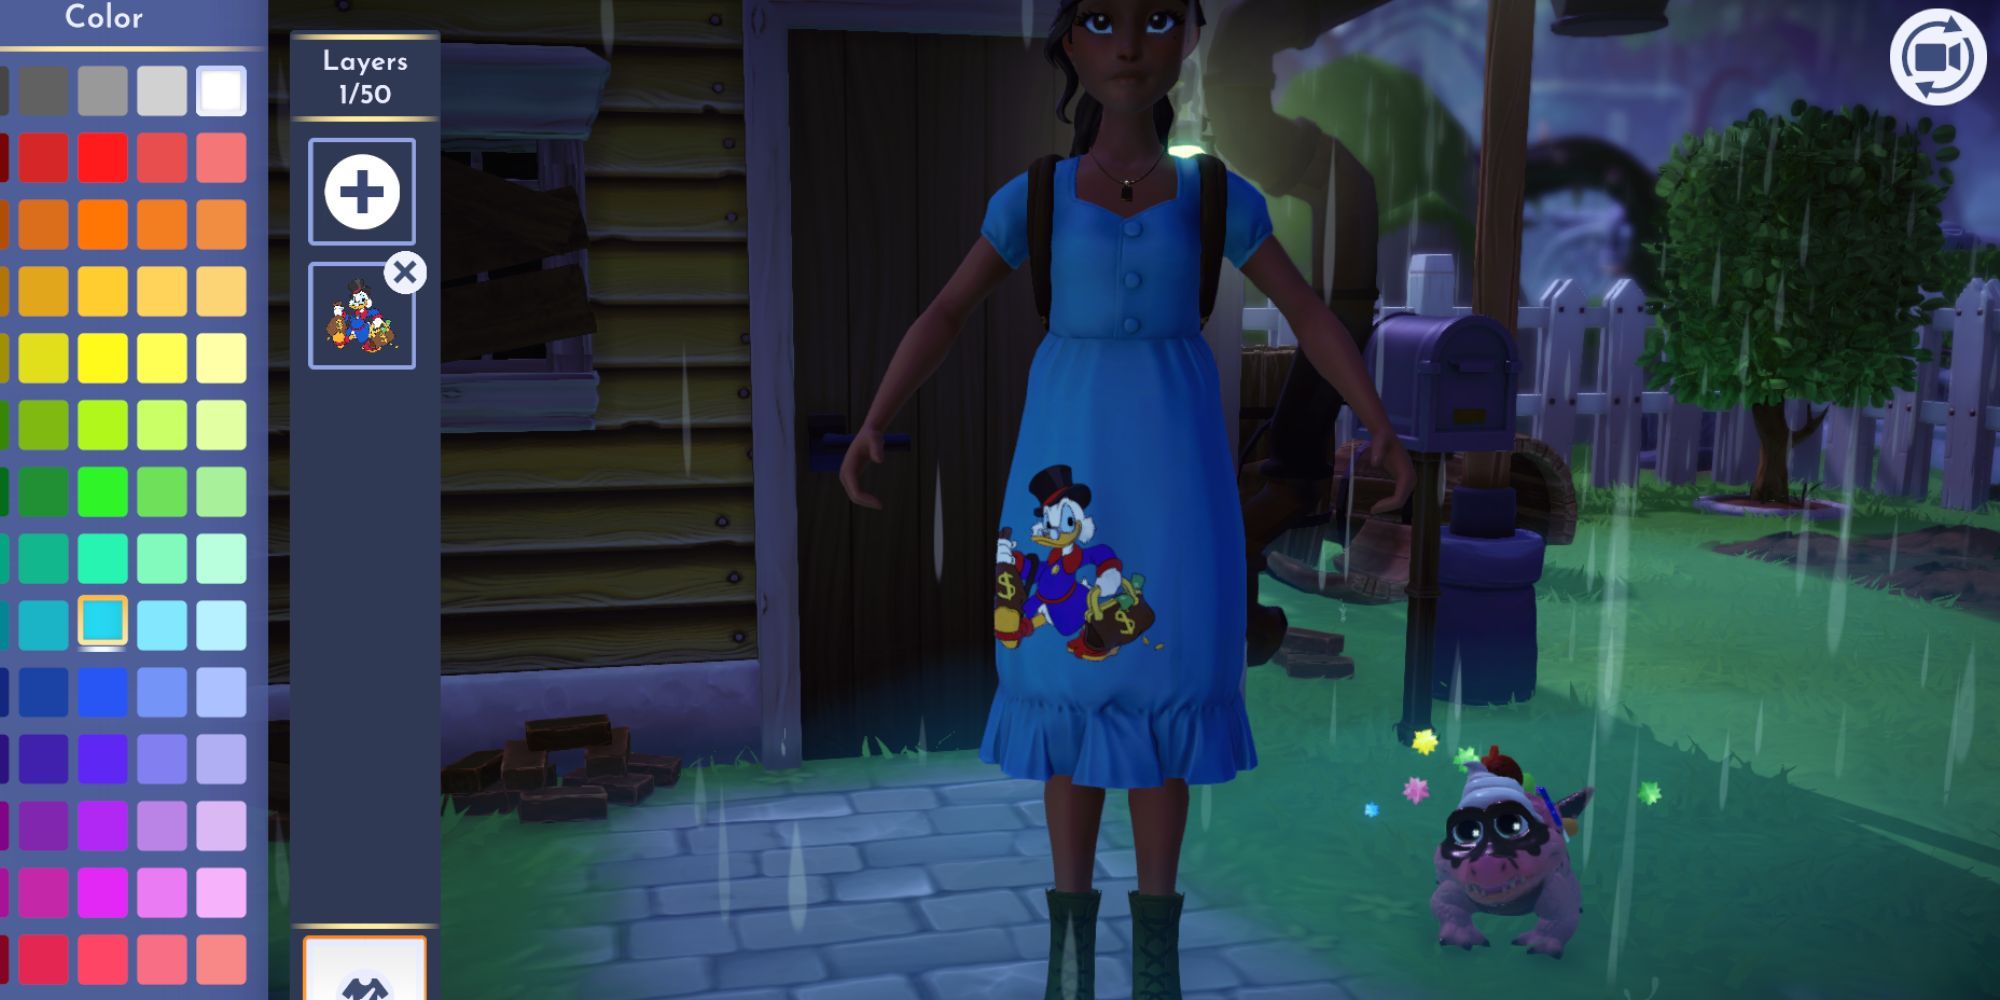 Disney Dreamlight Valley. Creating a dress in the clothes editor. The dress is blue with a print of Scrooge McDuck at the bottom.